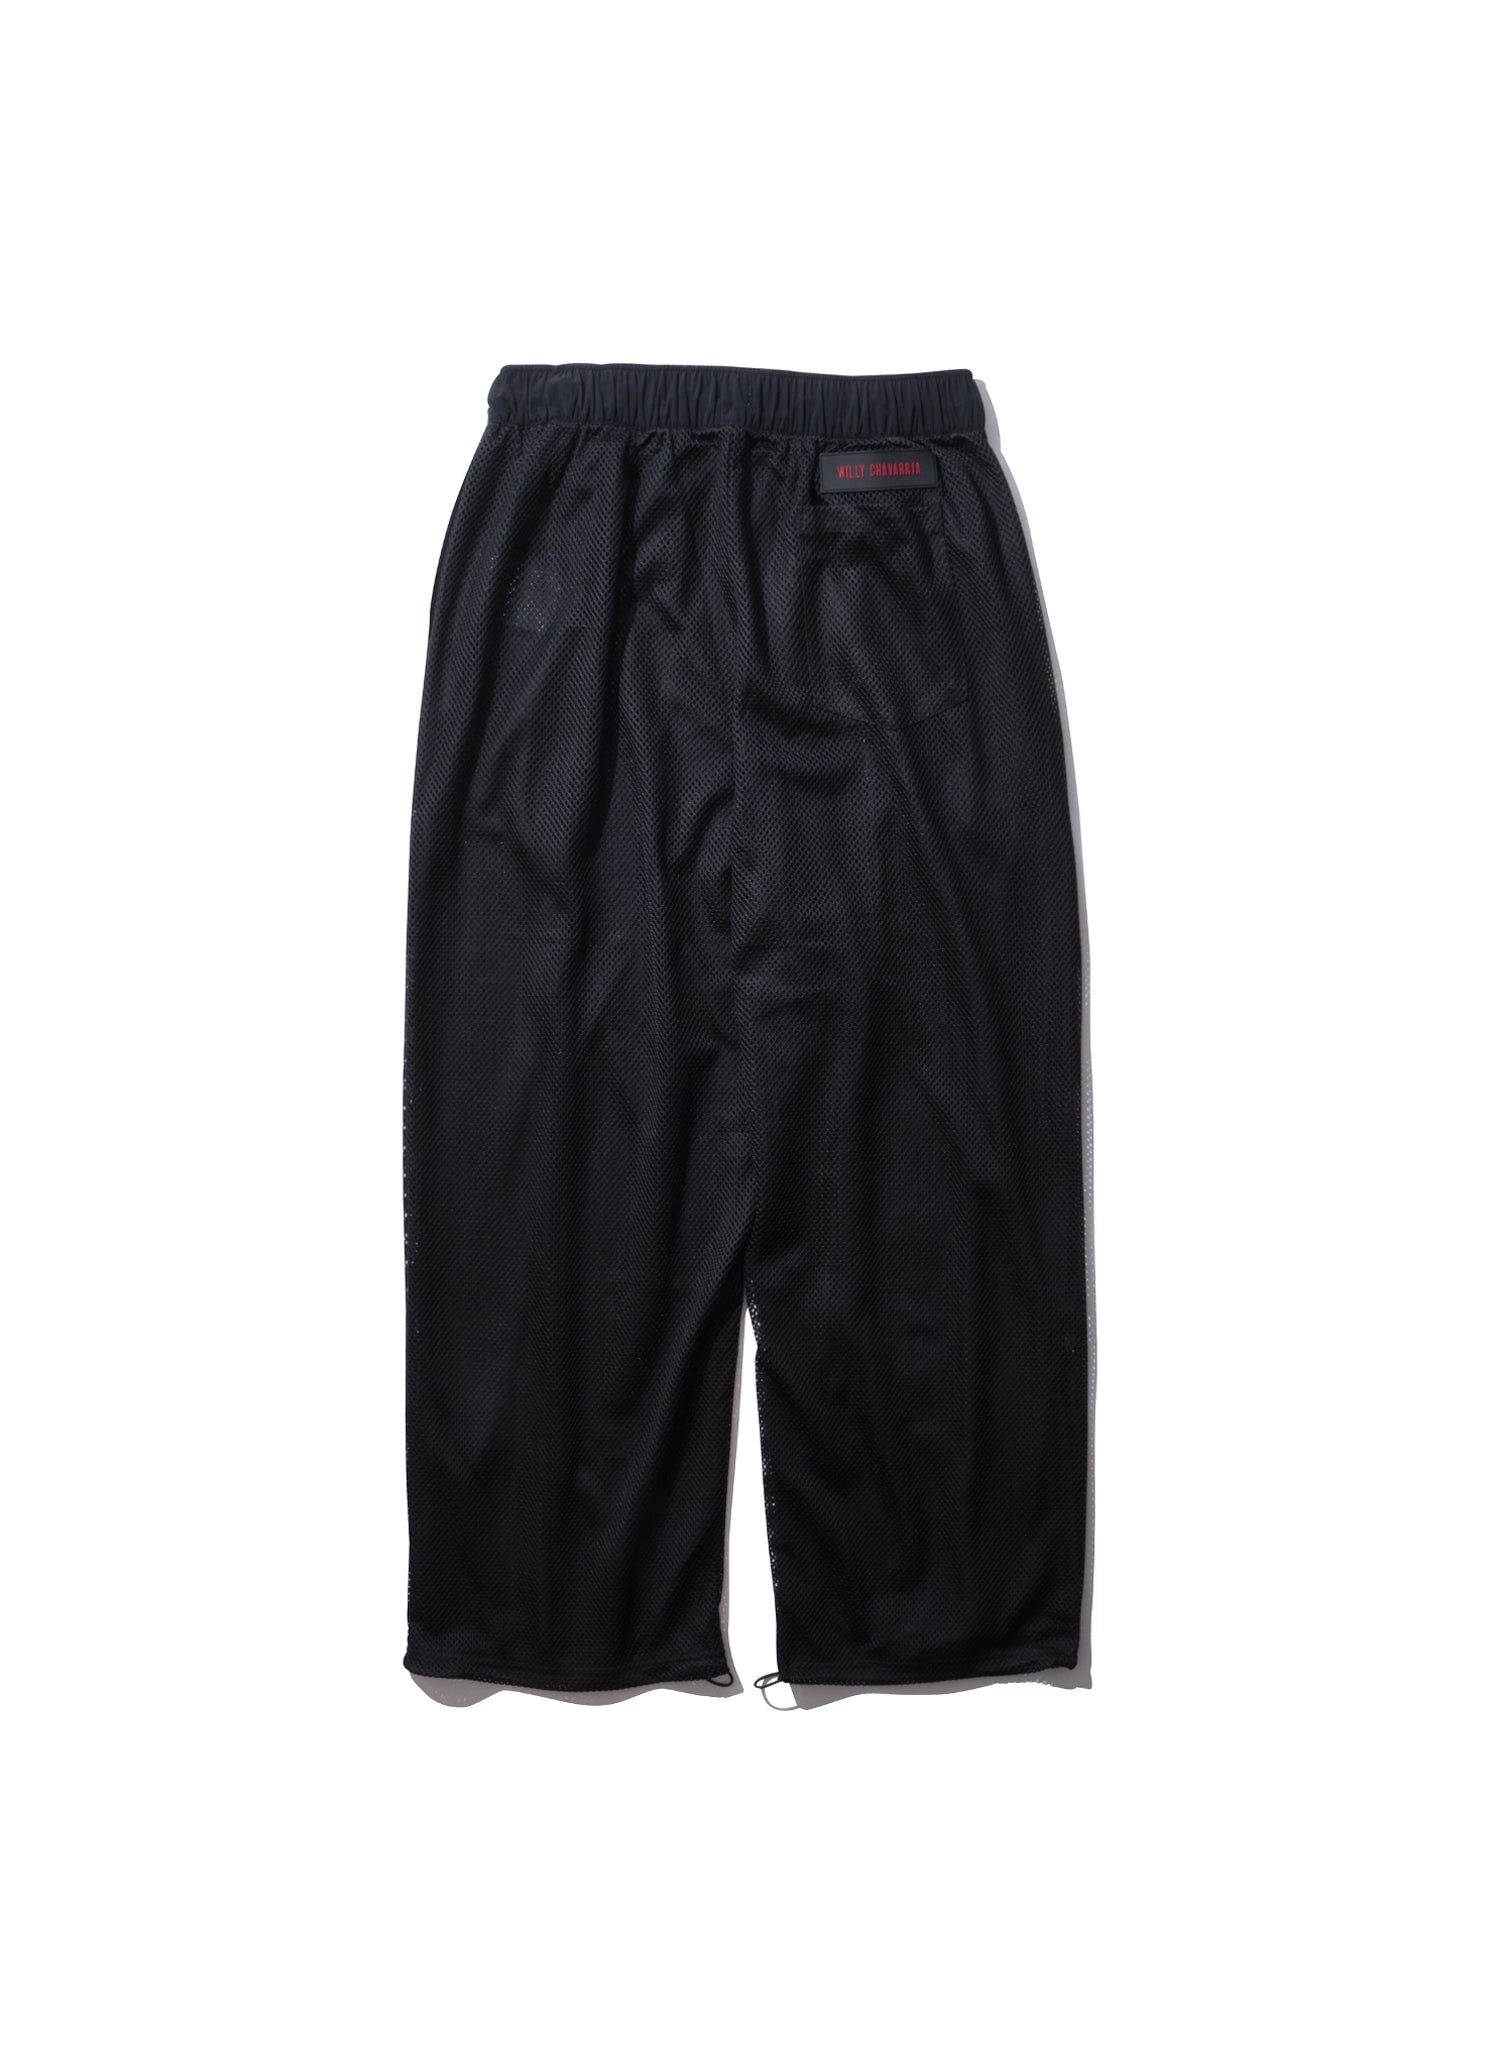 WILLY CHAVARRIA / MESH LONG PANTS WILLY BLACK